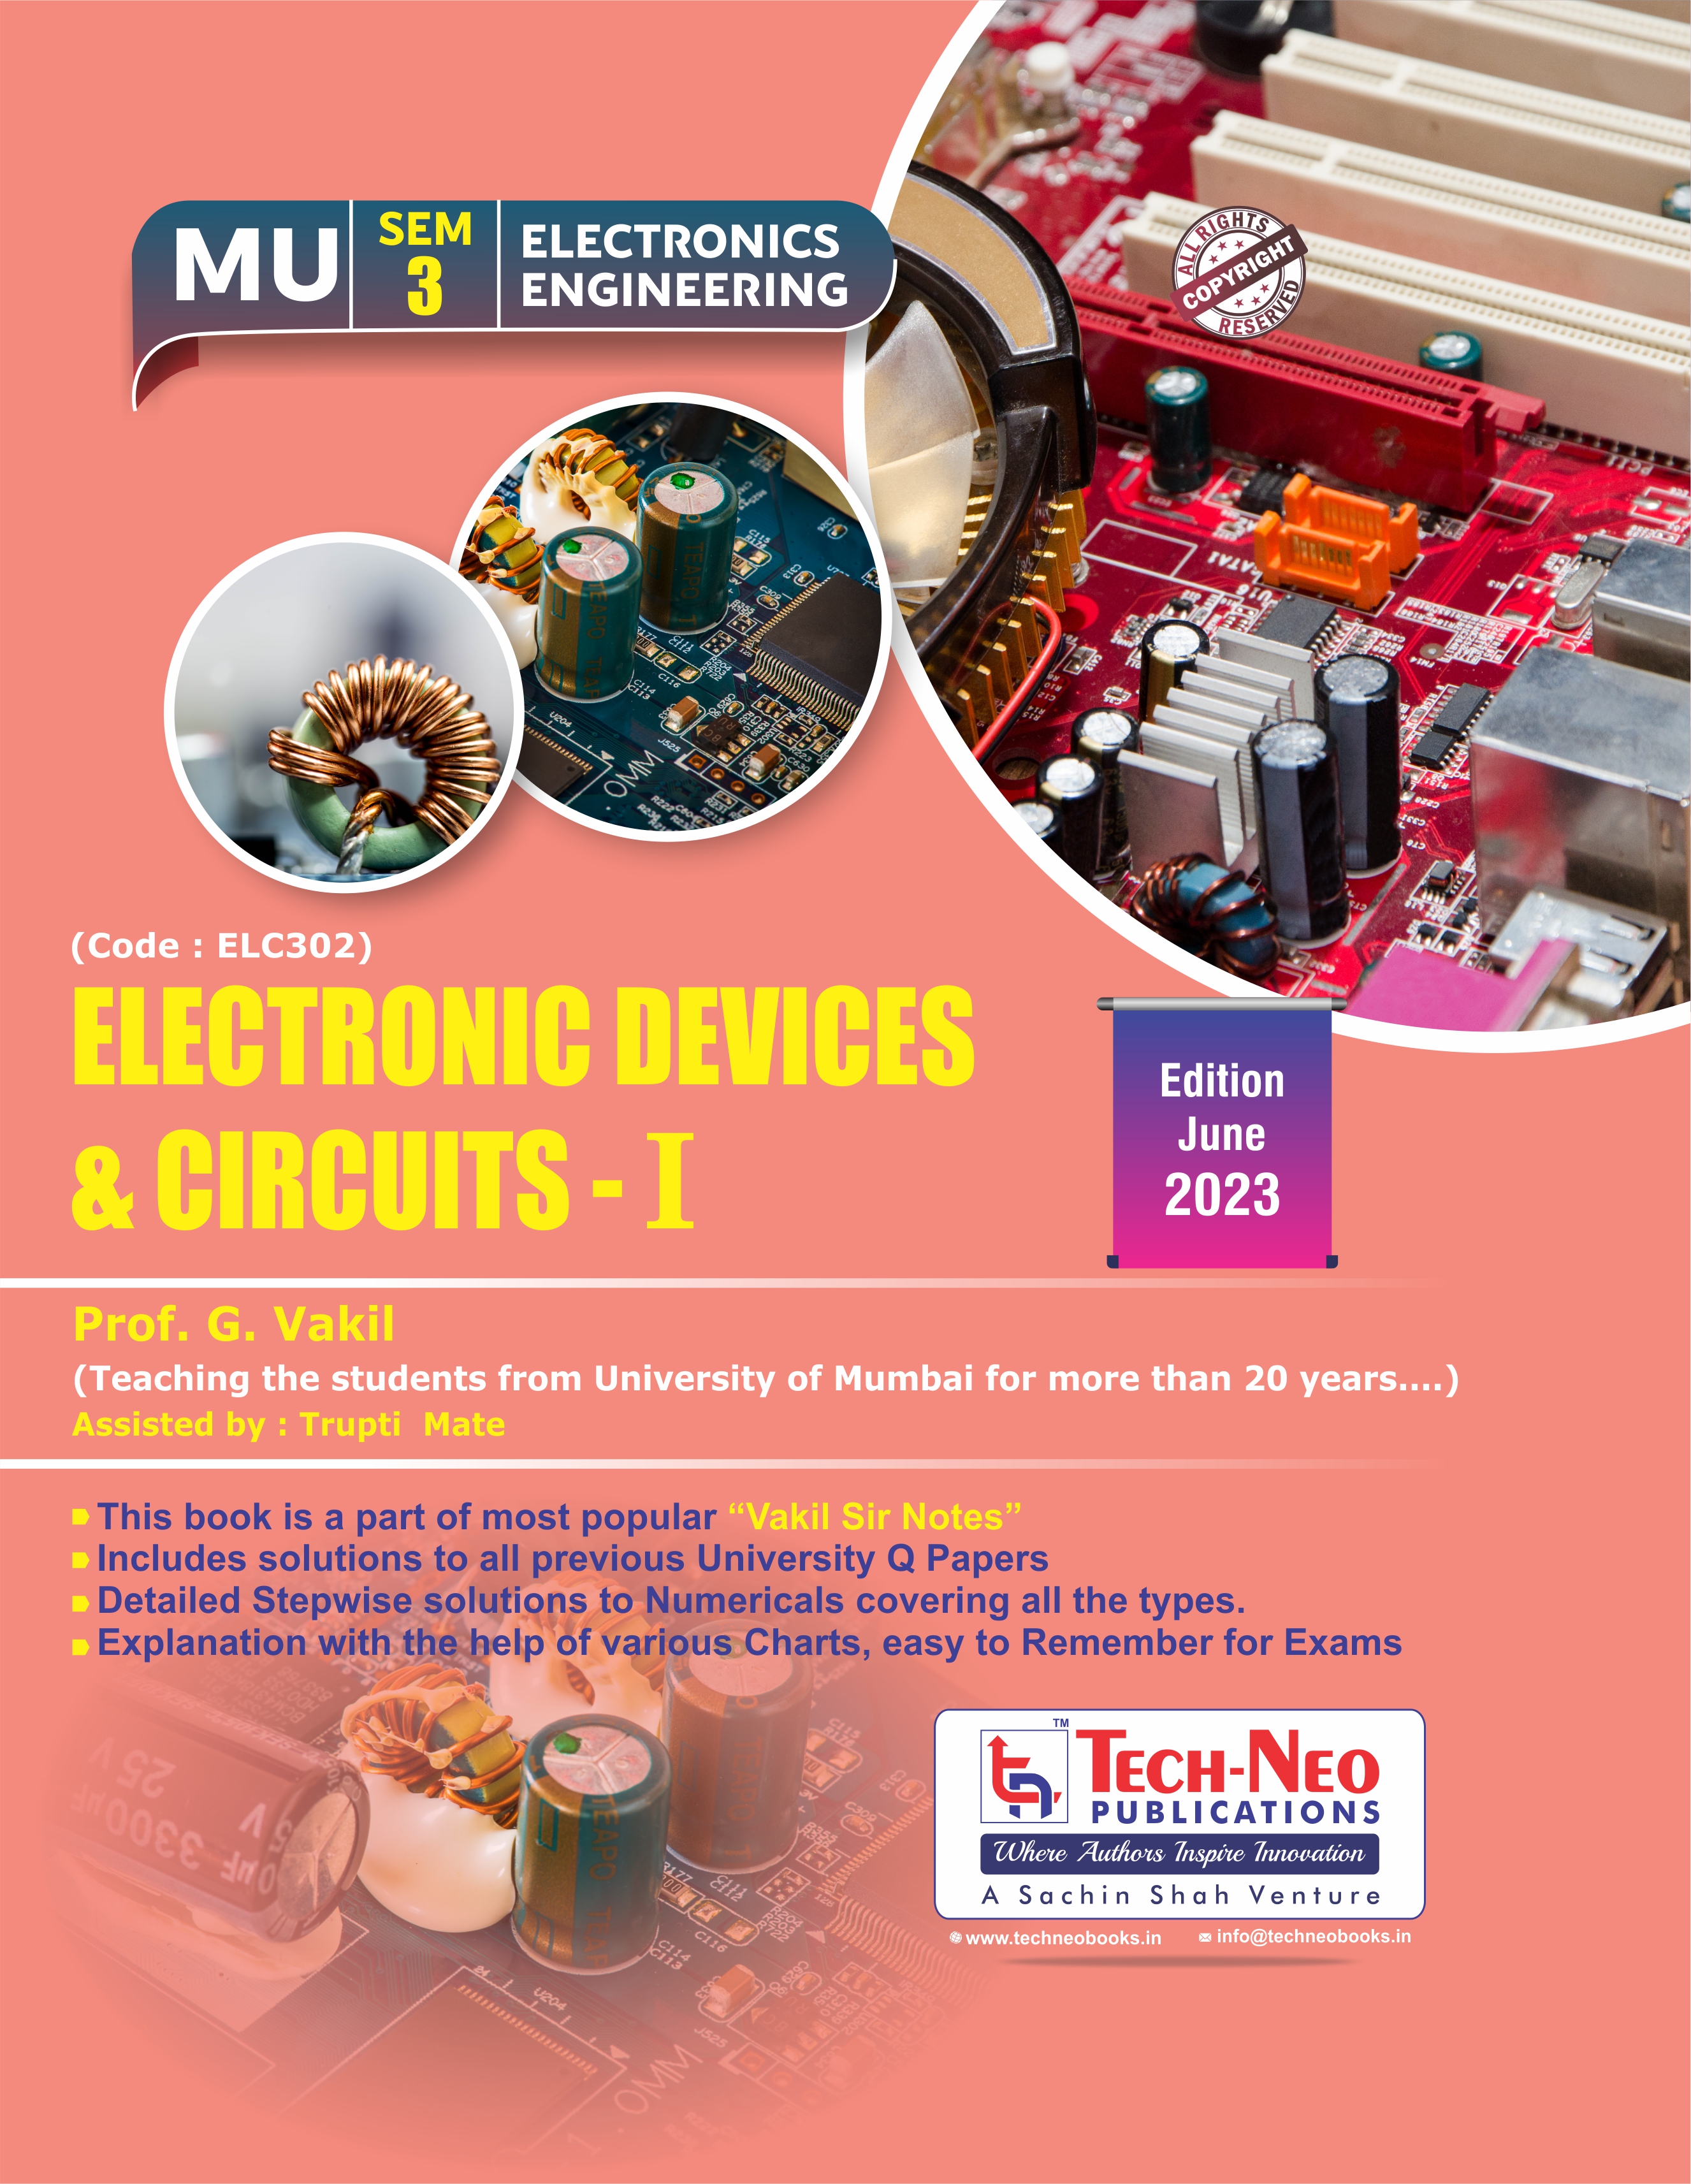 Electronic Devices & Circuits I